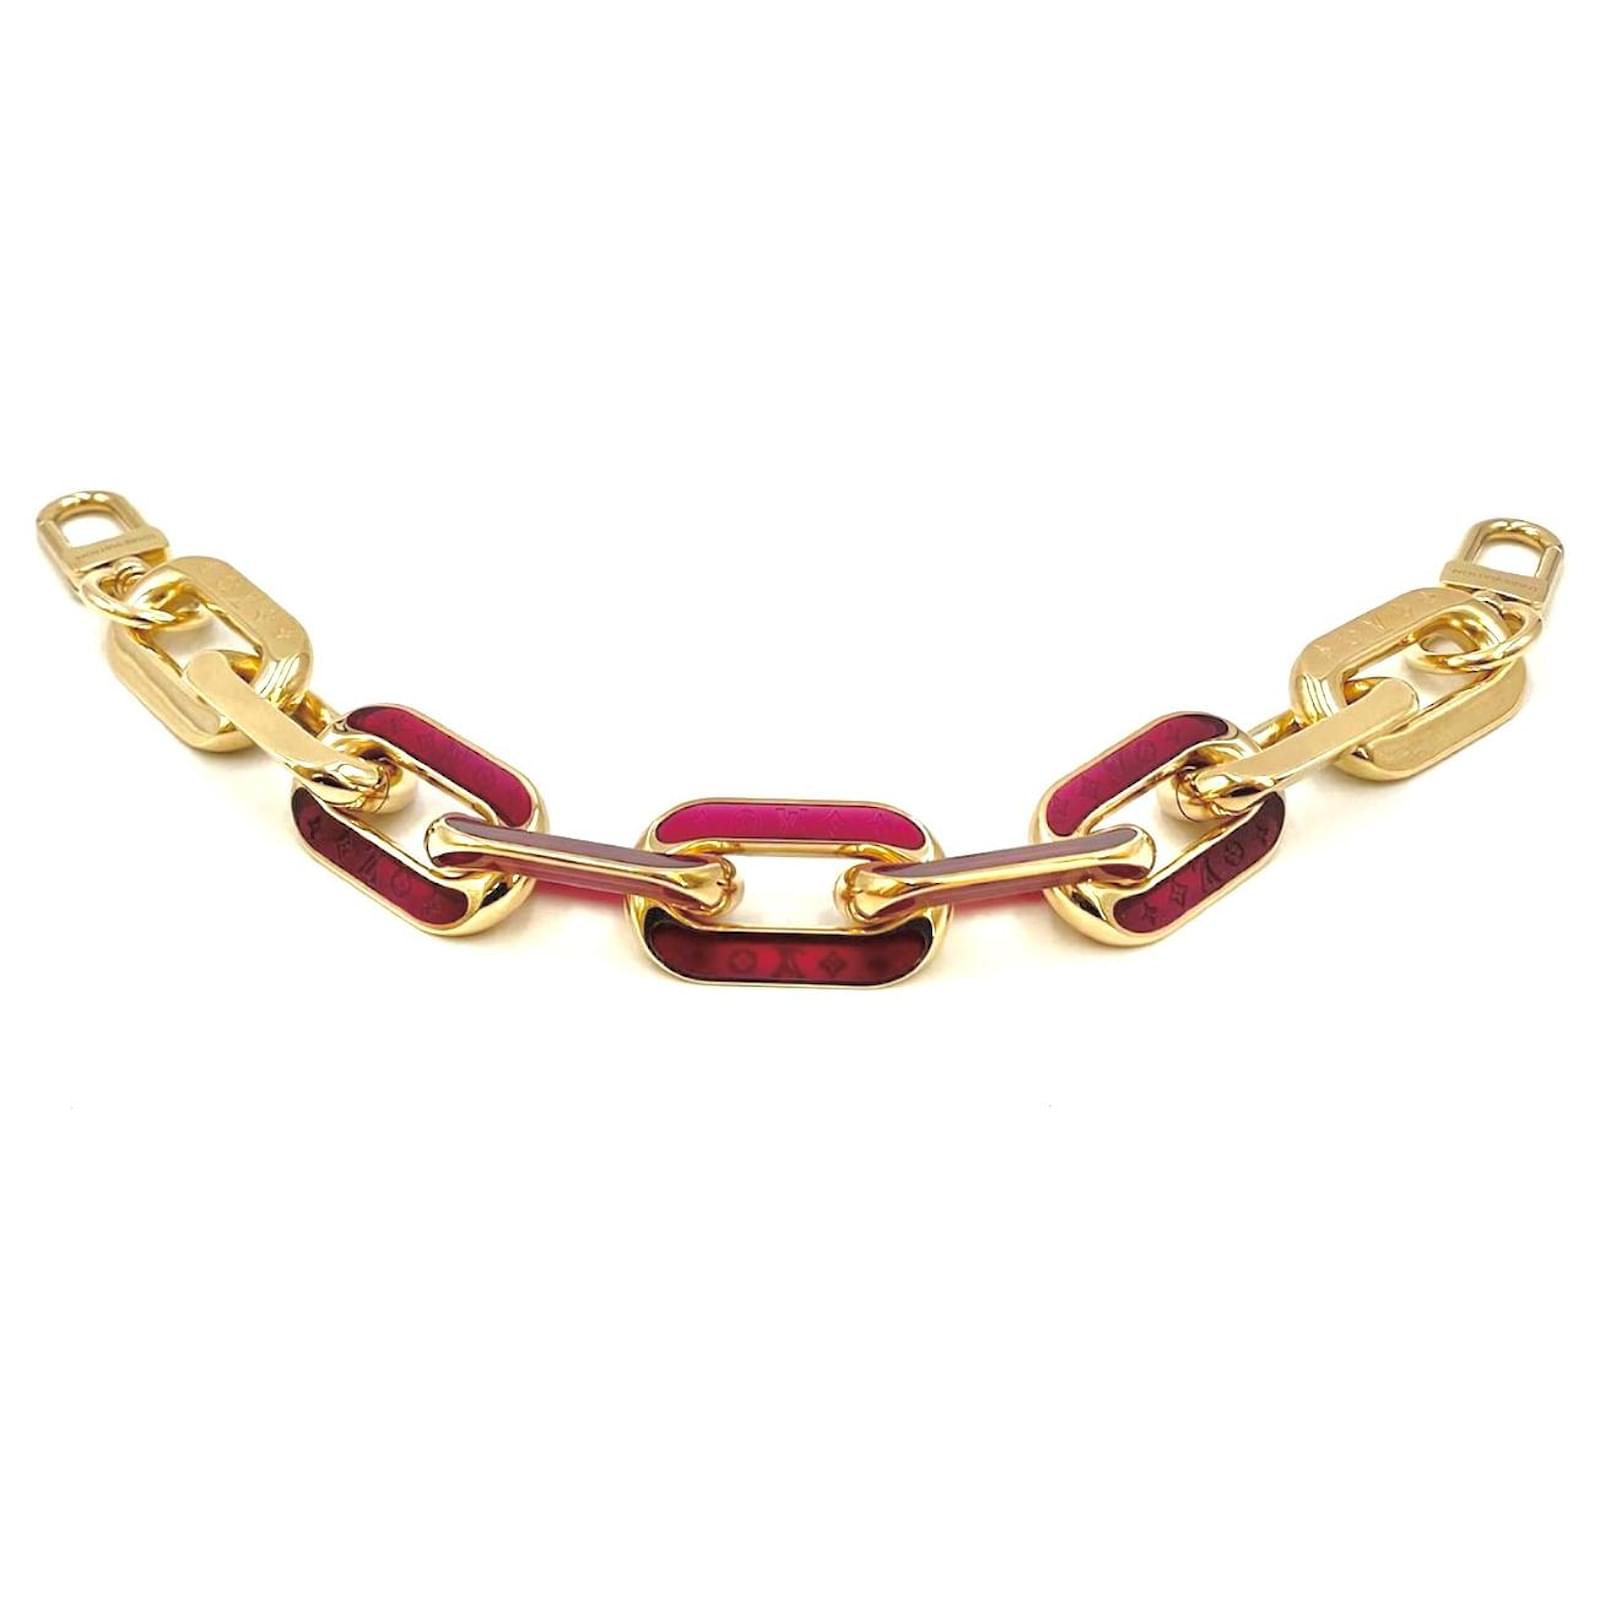 Buy Gold Chain Strap for Louis Vuitton Online In India -  India